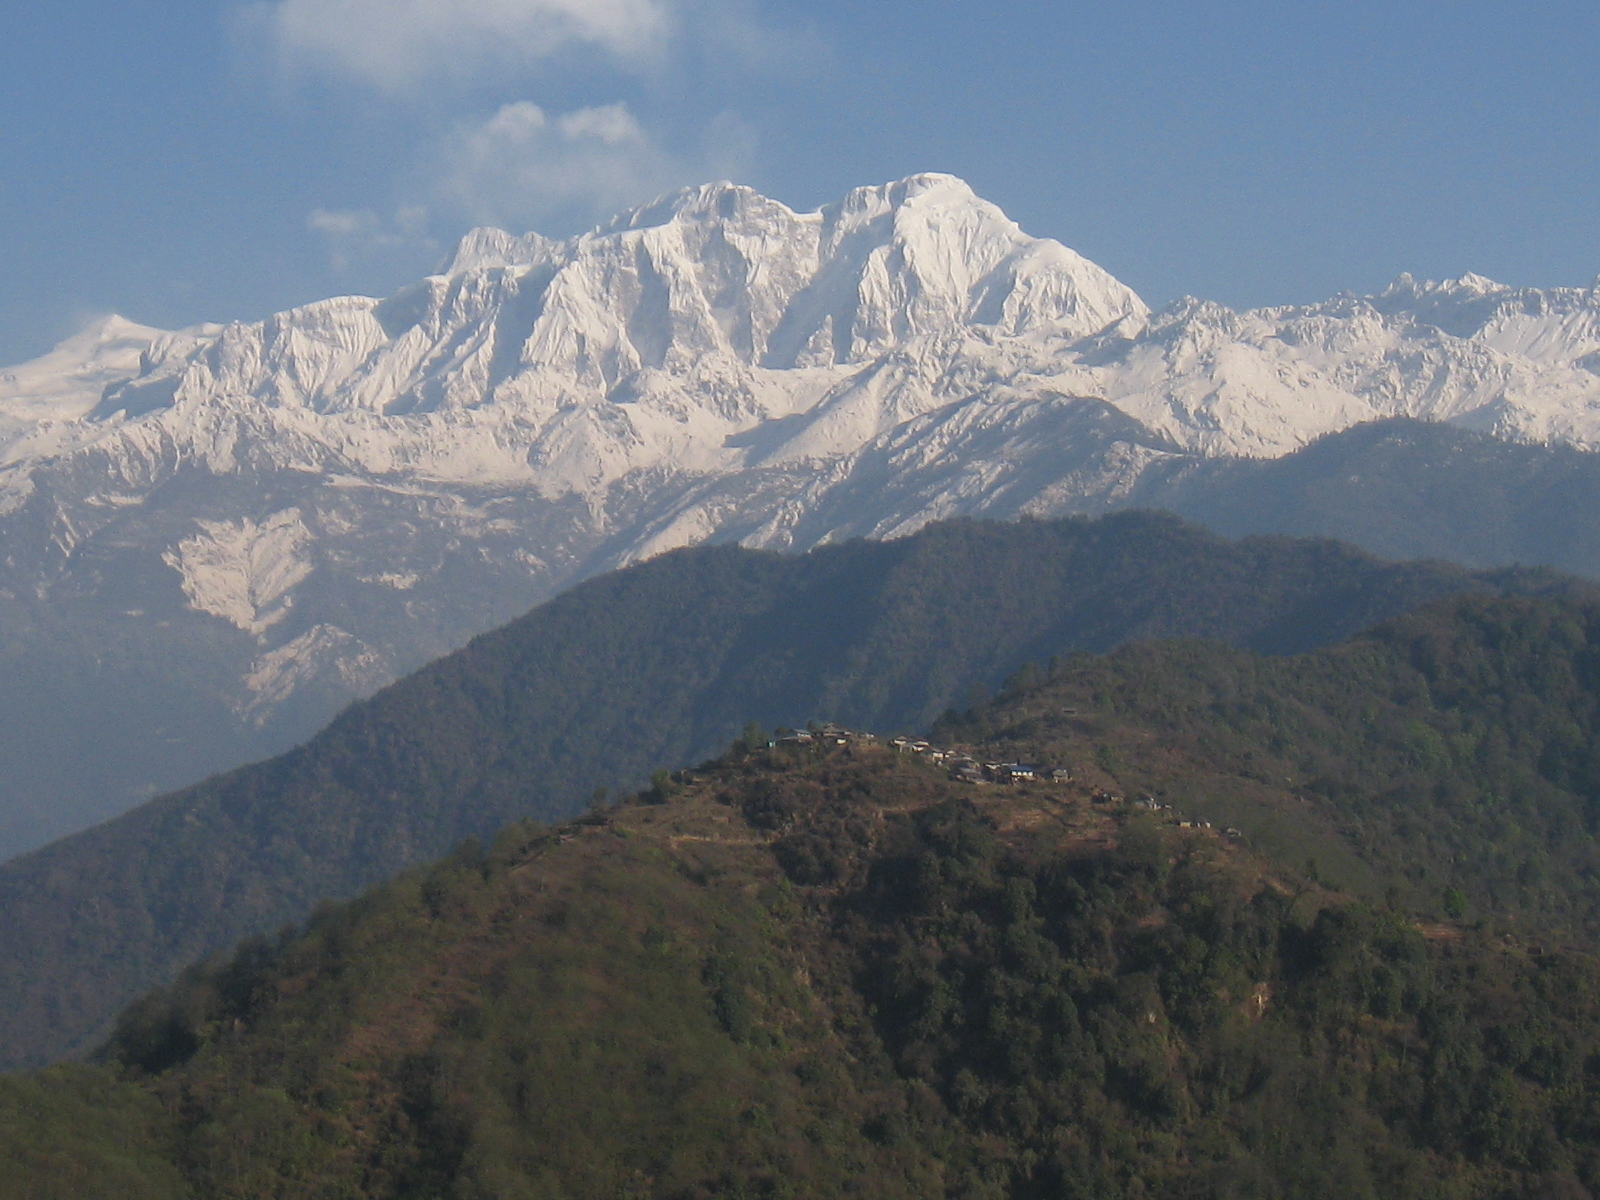 Trek to Ghan Pokhara. Day excursion to the Ghurjung village. O/n in Home stay.'